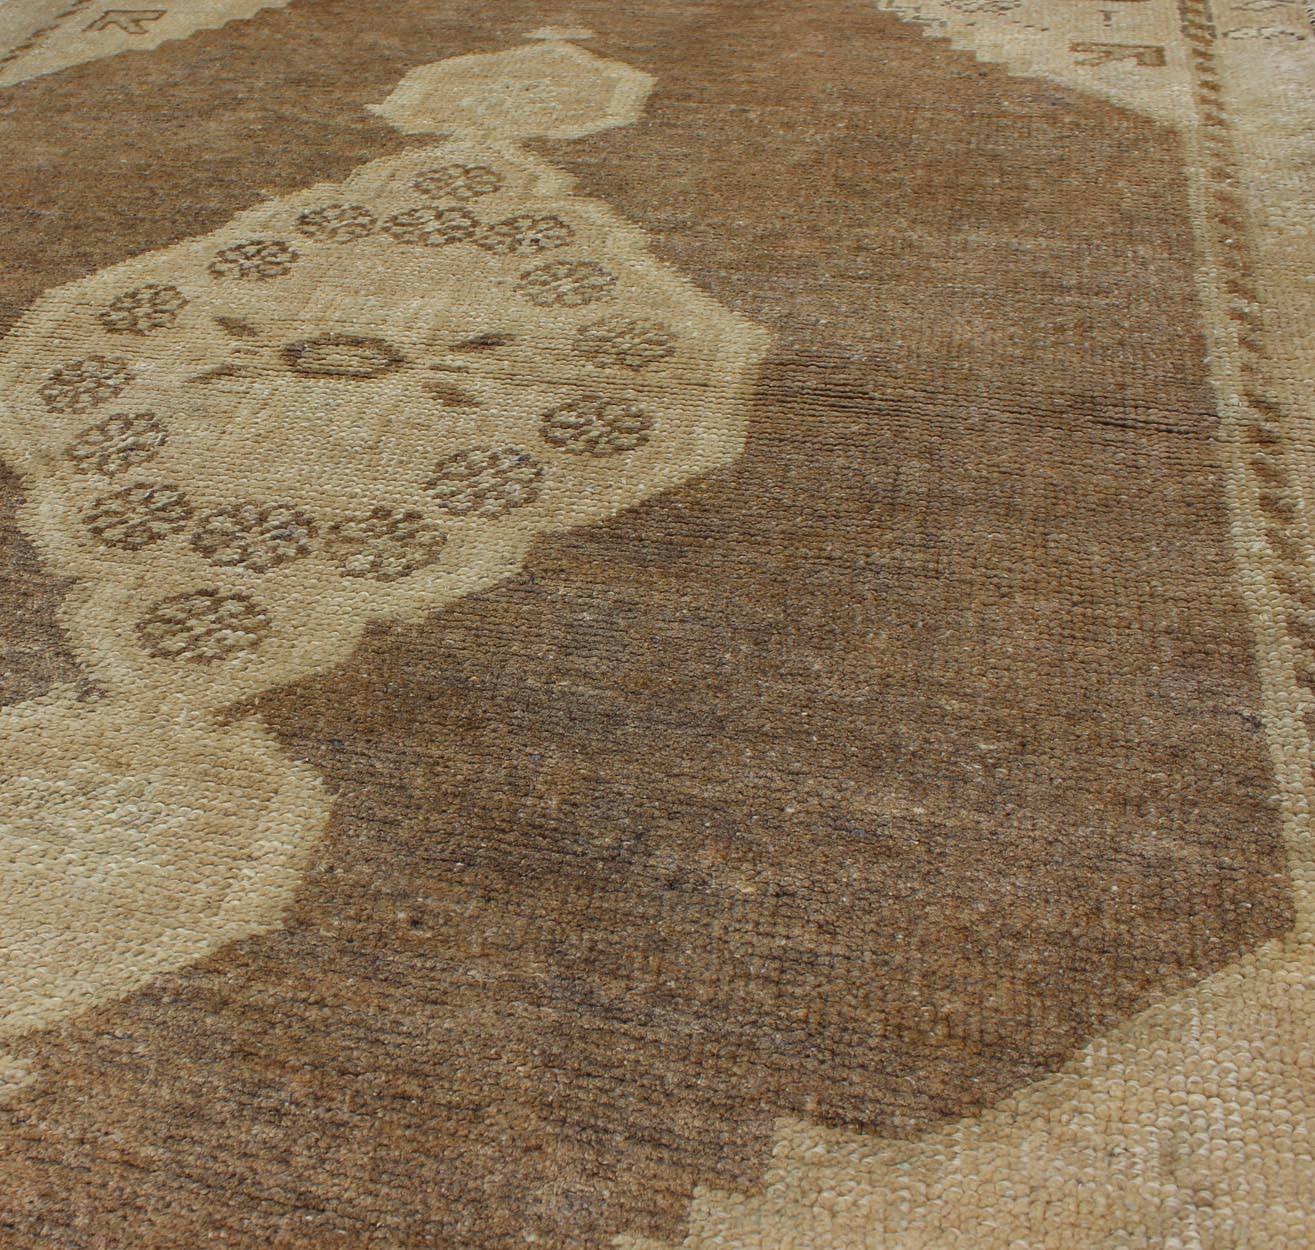 Mid-20th Century Midcentury Turkish Oushak Rug with Medallion and Cornices in Brown and Taupe